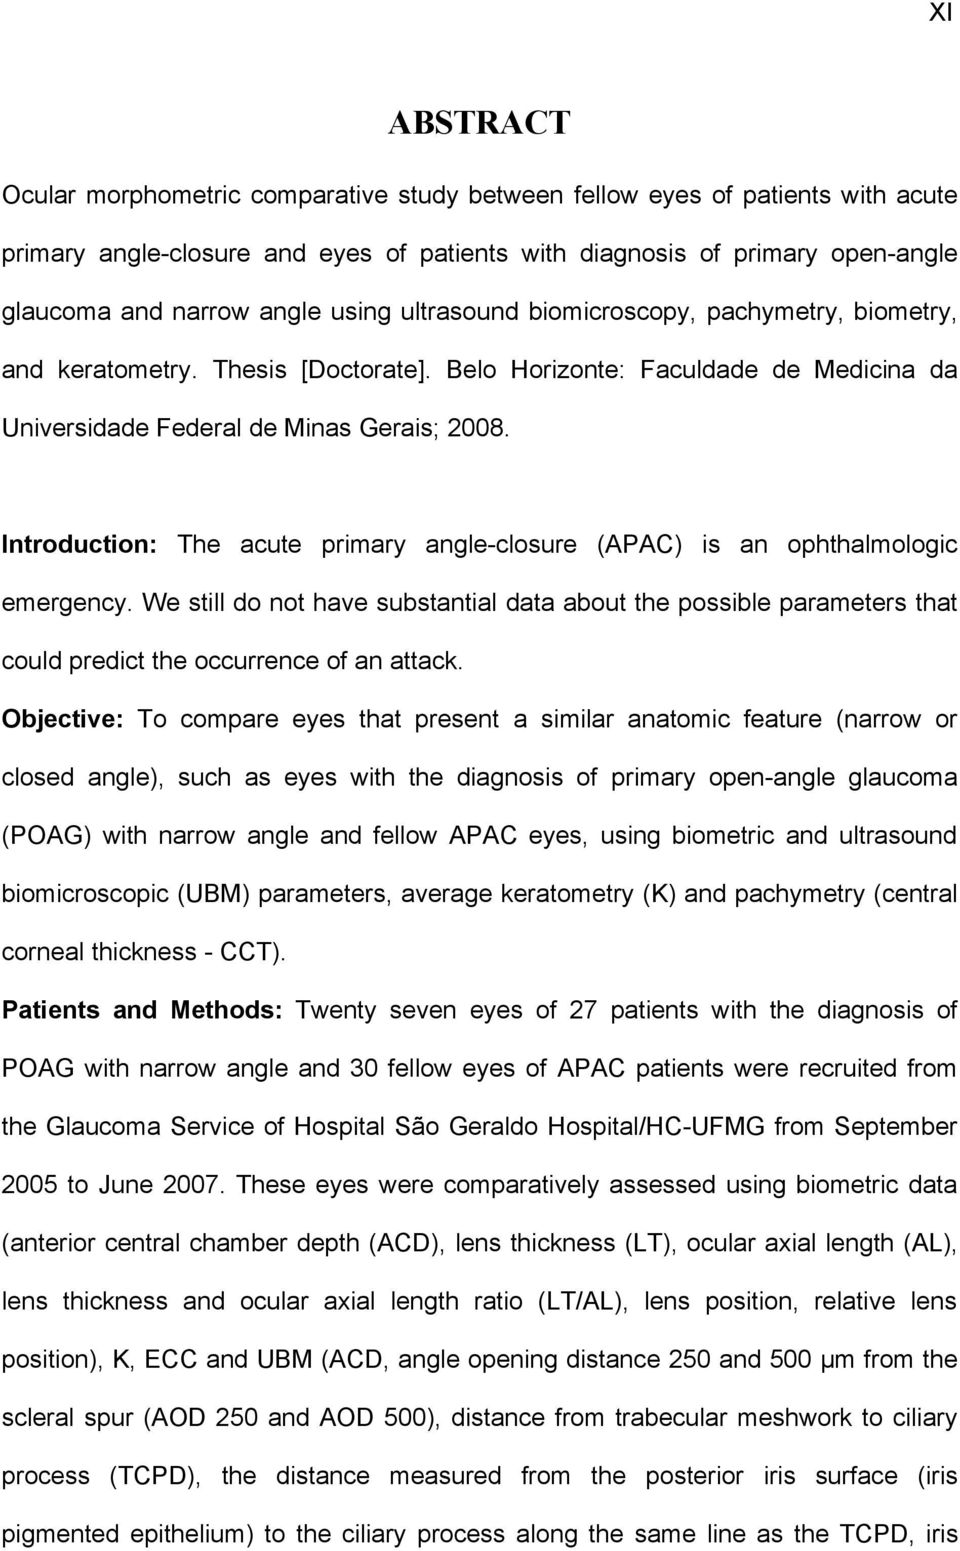 Introduction: The acute primary angle-closure (APAC) is an ophthalmologic emergency. We still do not have substantial data about the possible parameters that could predict the occurrence of an attack.